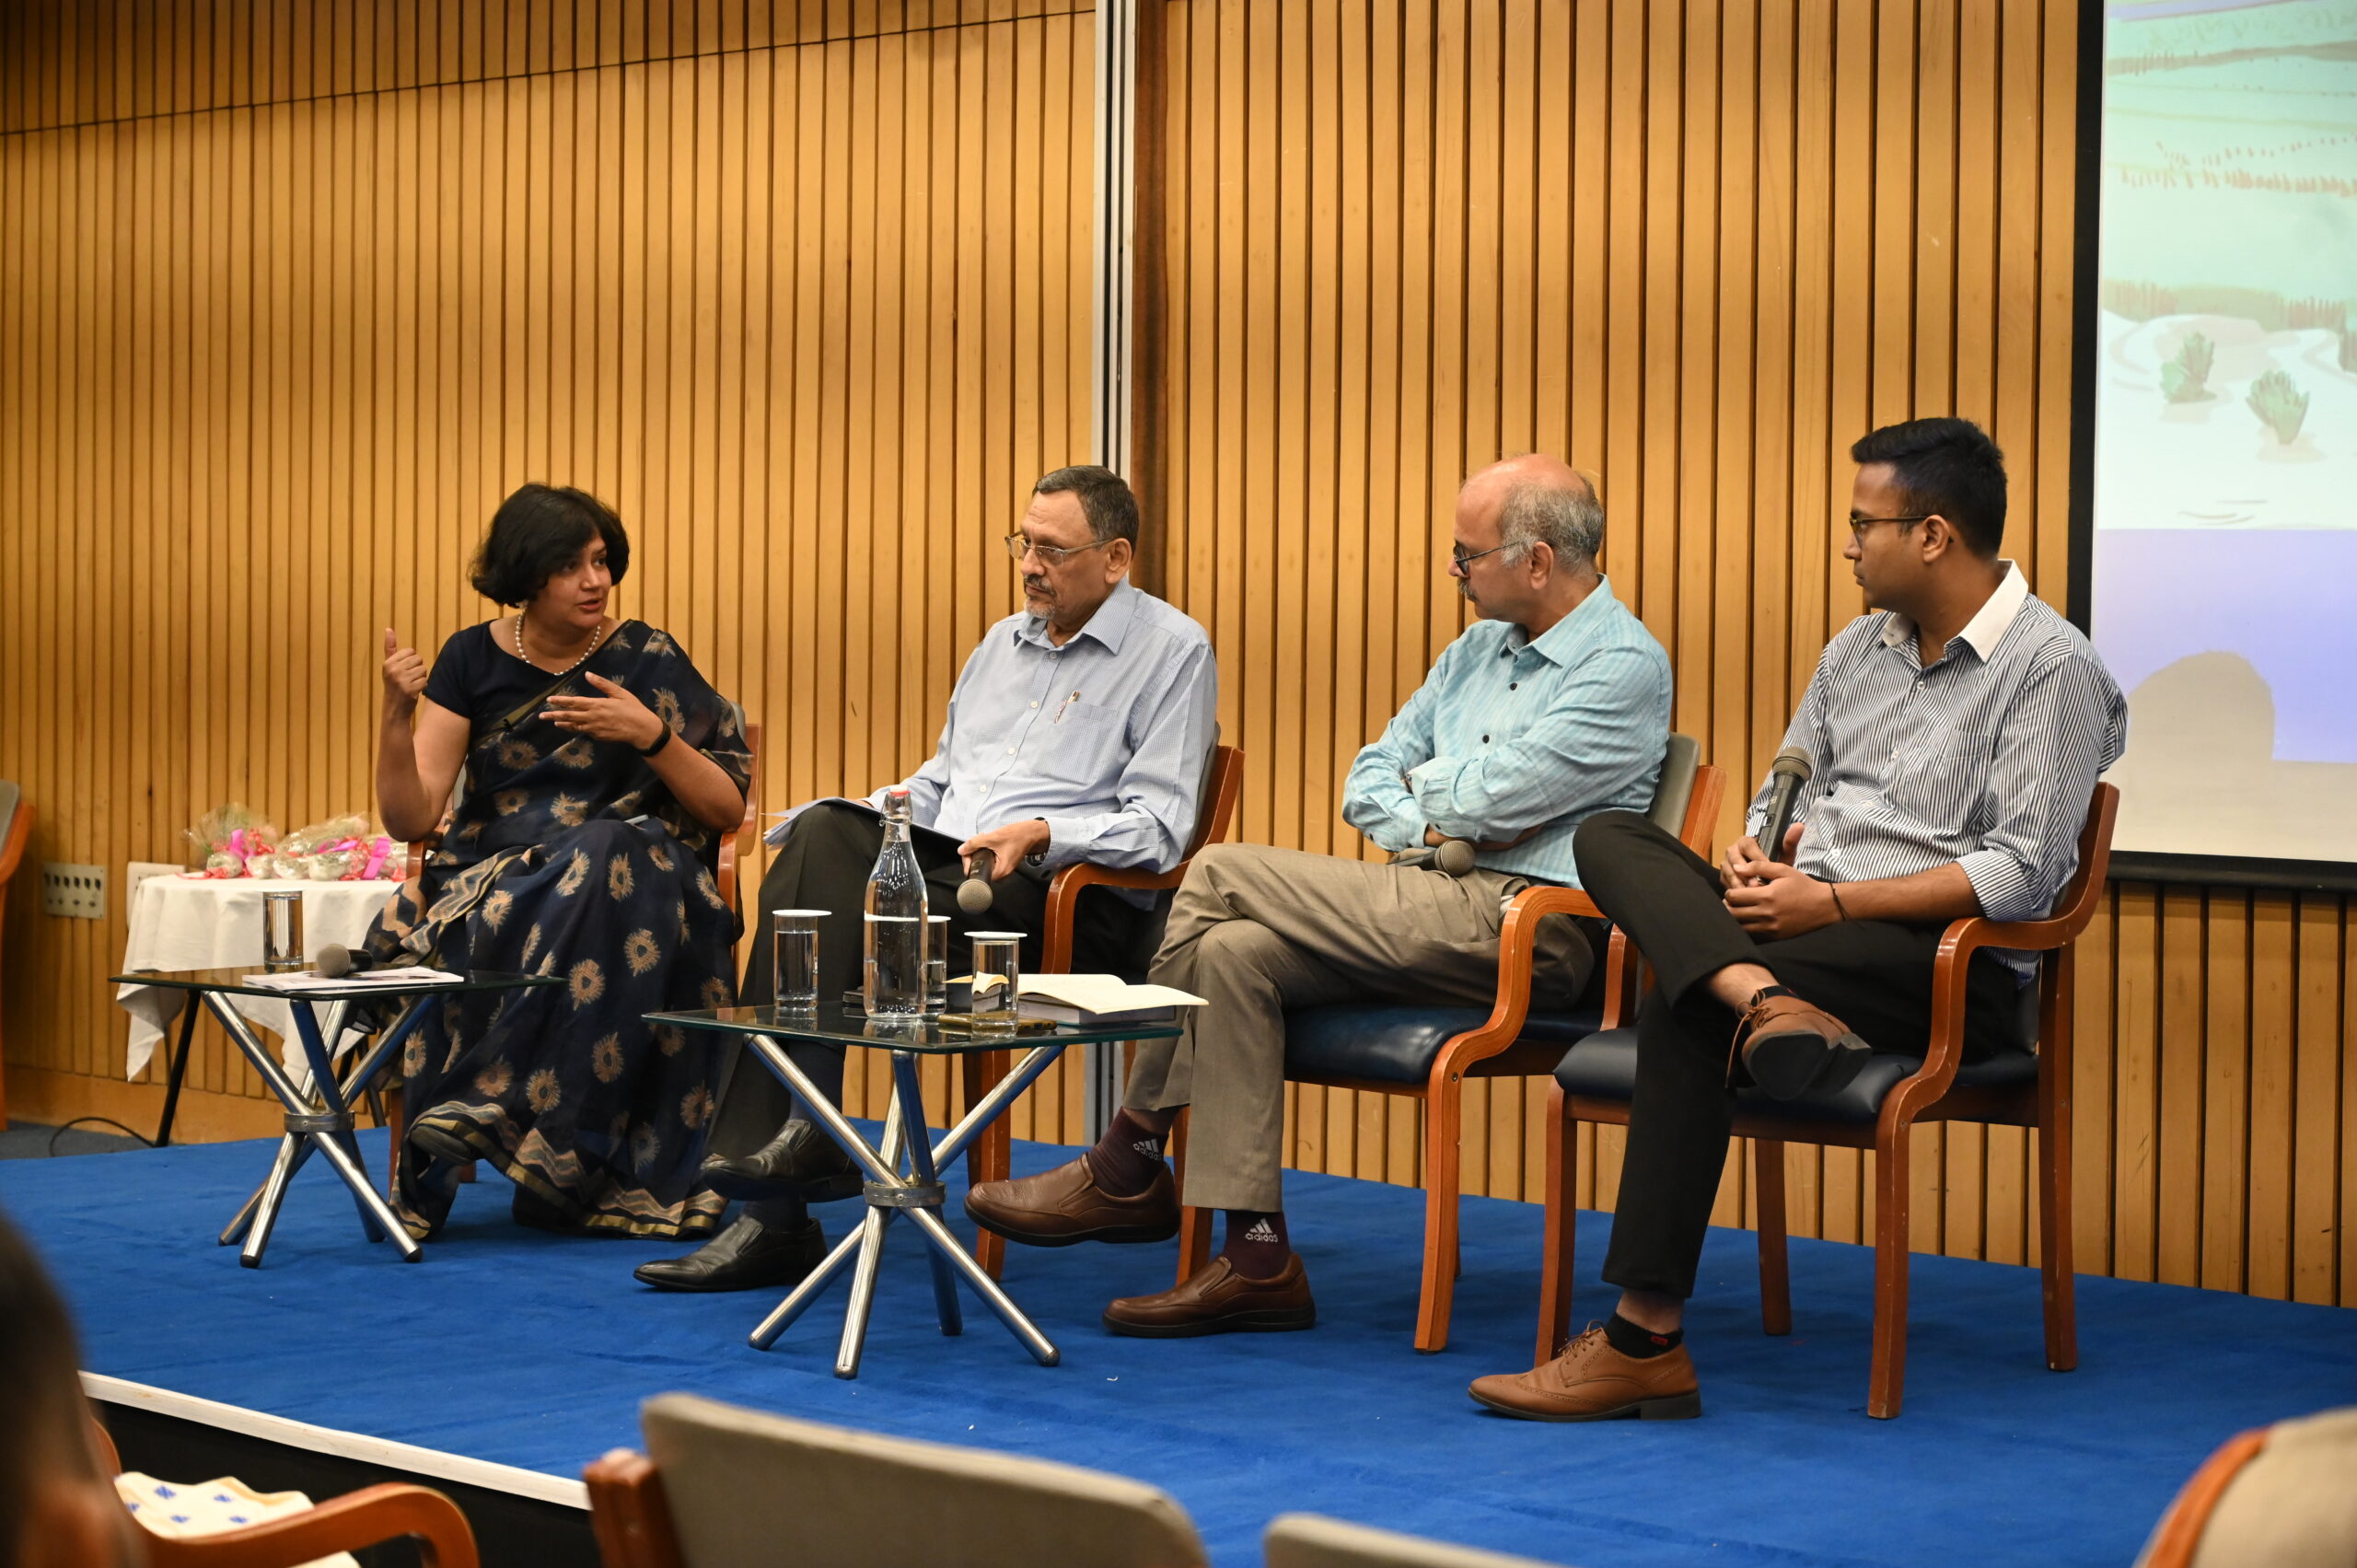 Seated on a dais, from left: Dr Veena Srinivasan, Executive Director, WELL Labs, speaks with Dr Alok Sikka, Dr Shambu Prasad and Mr Amandeep Panwar at India International Centre on July 26.